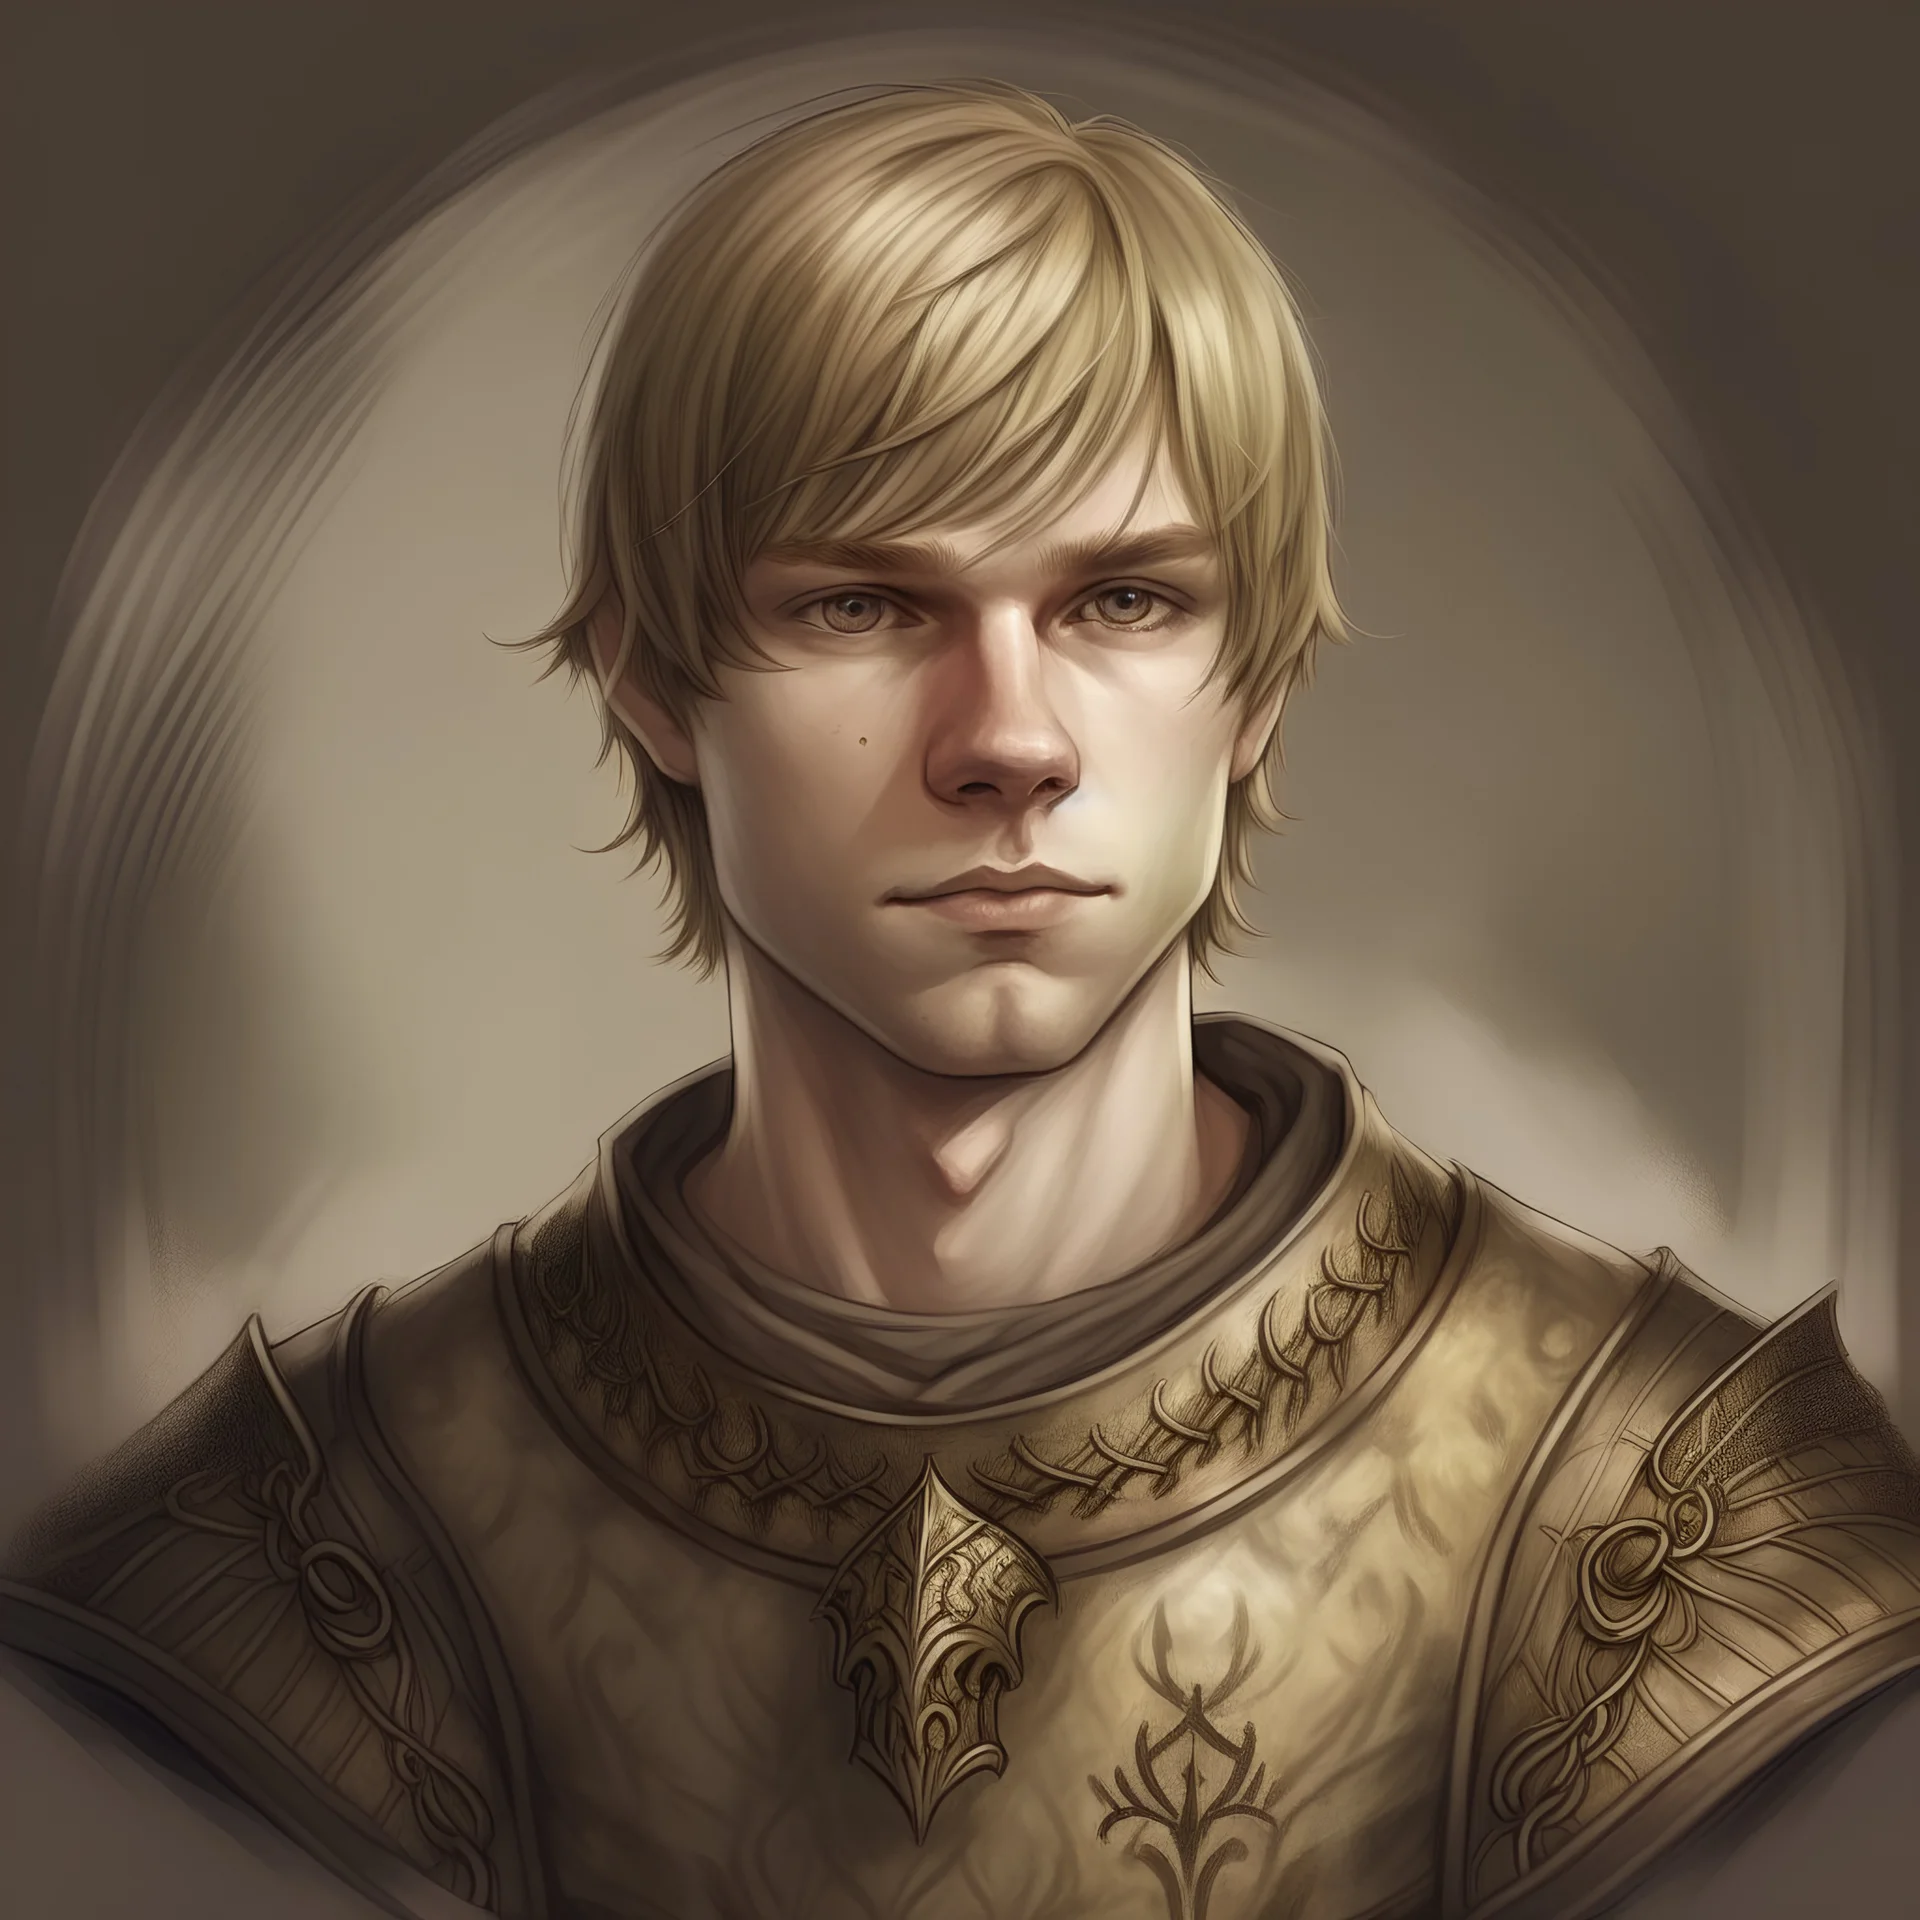 fantasy drawn, male in end thirties, 190cm in hight, in light armor, dark blonde bowl cut, a bit of an idiot but kindhearted, small smile